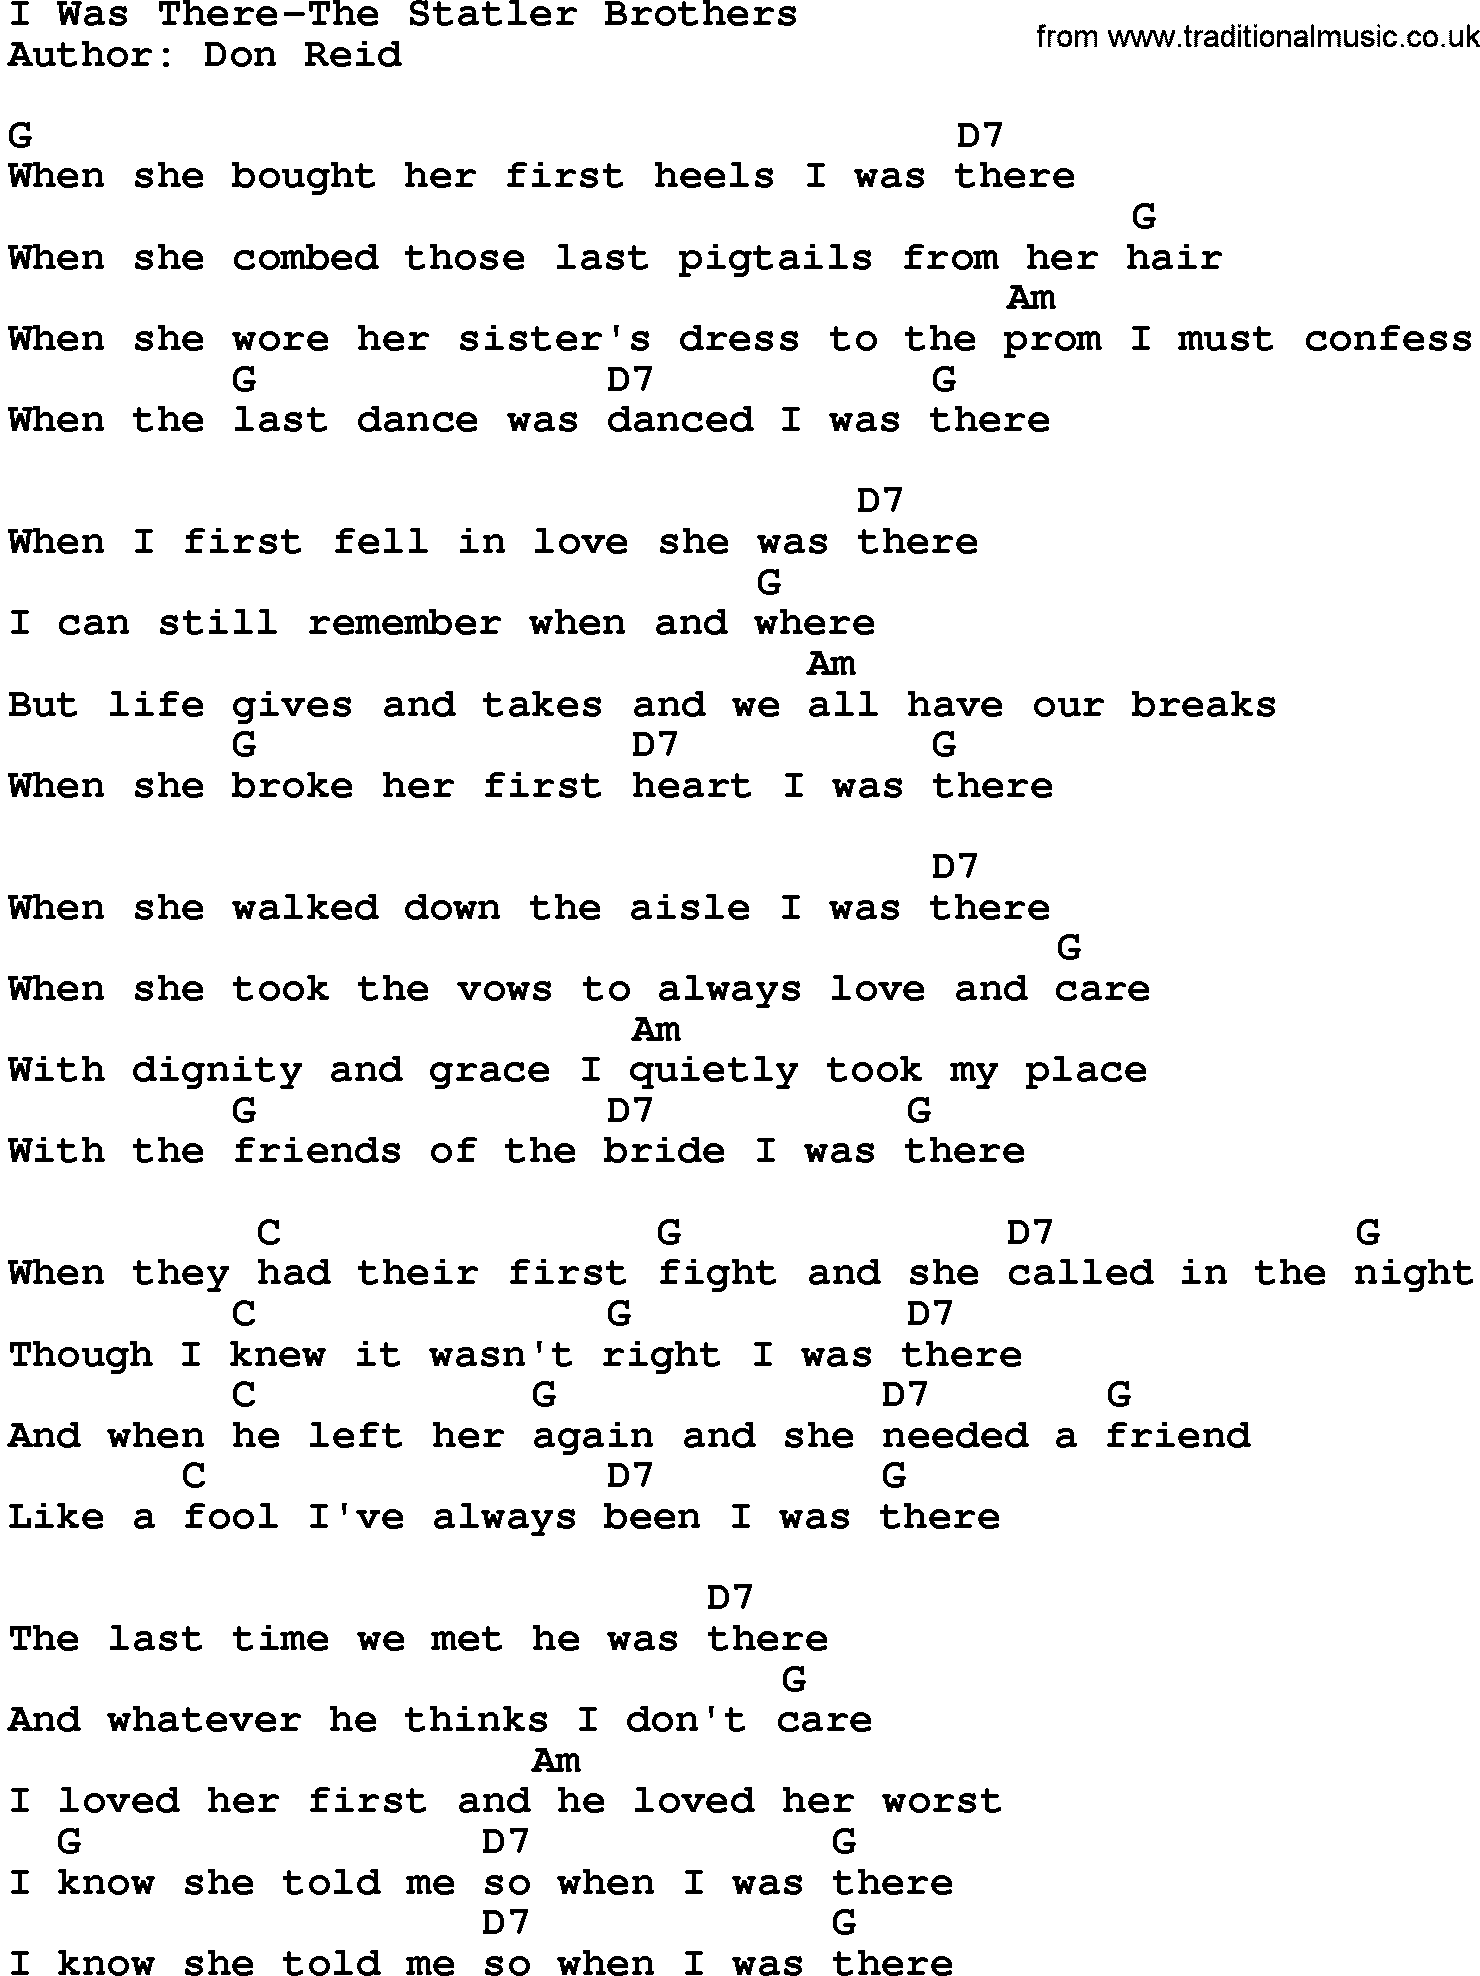 Country music song: I Was There-The Statler Brothers lyrics and chords